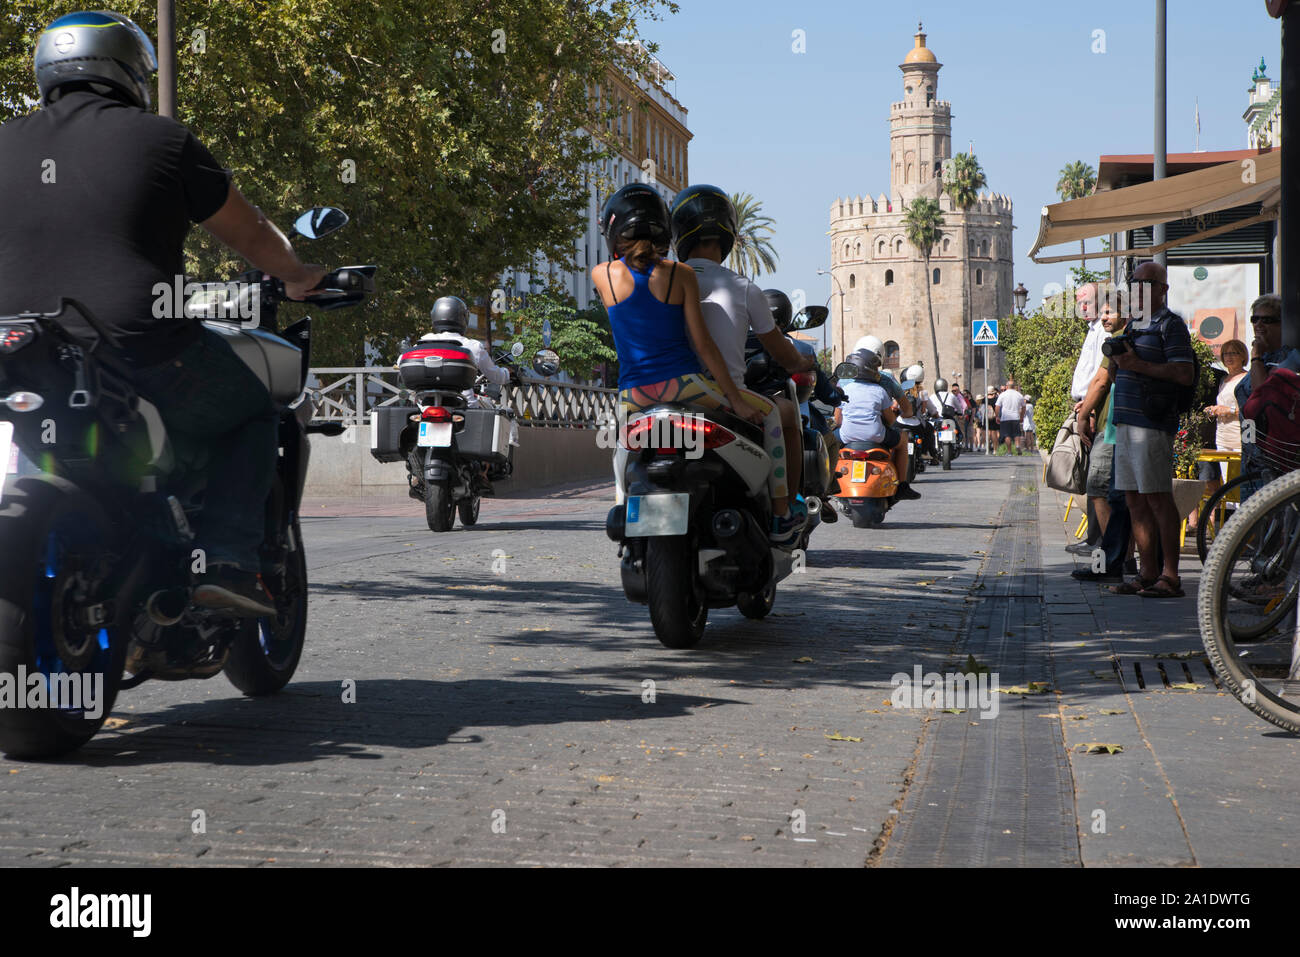 Seville, Andalusia, Spain - Distinguished Gentleman's Ride. Stock Photo